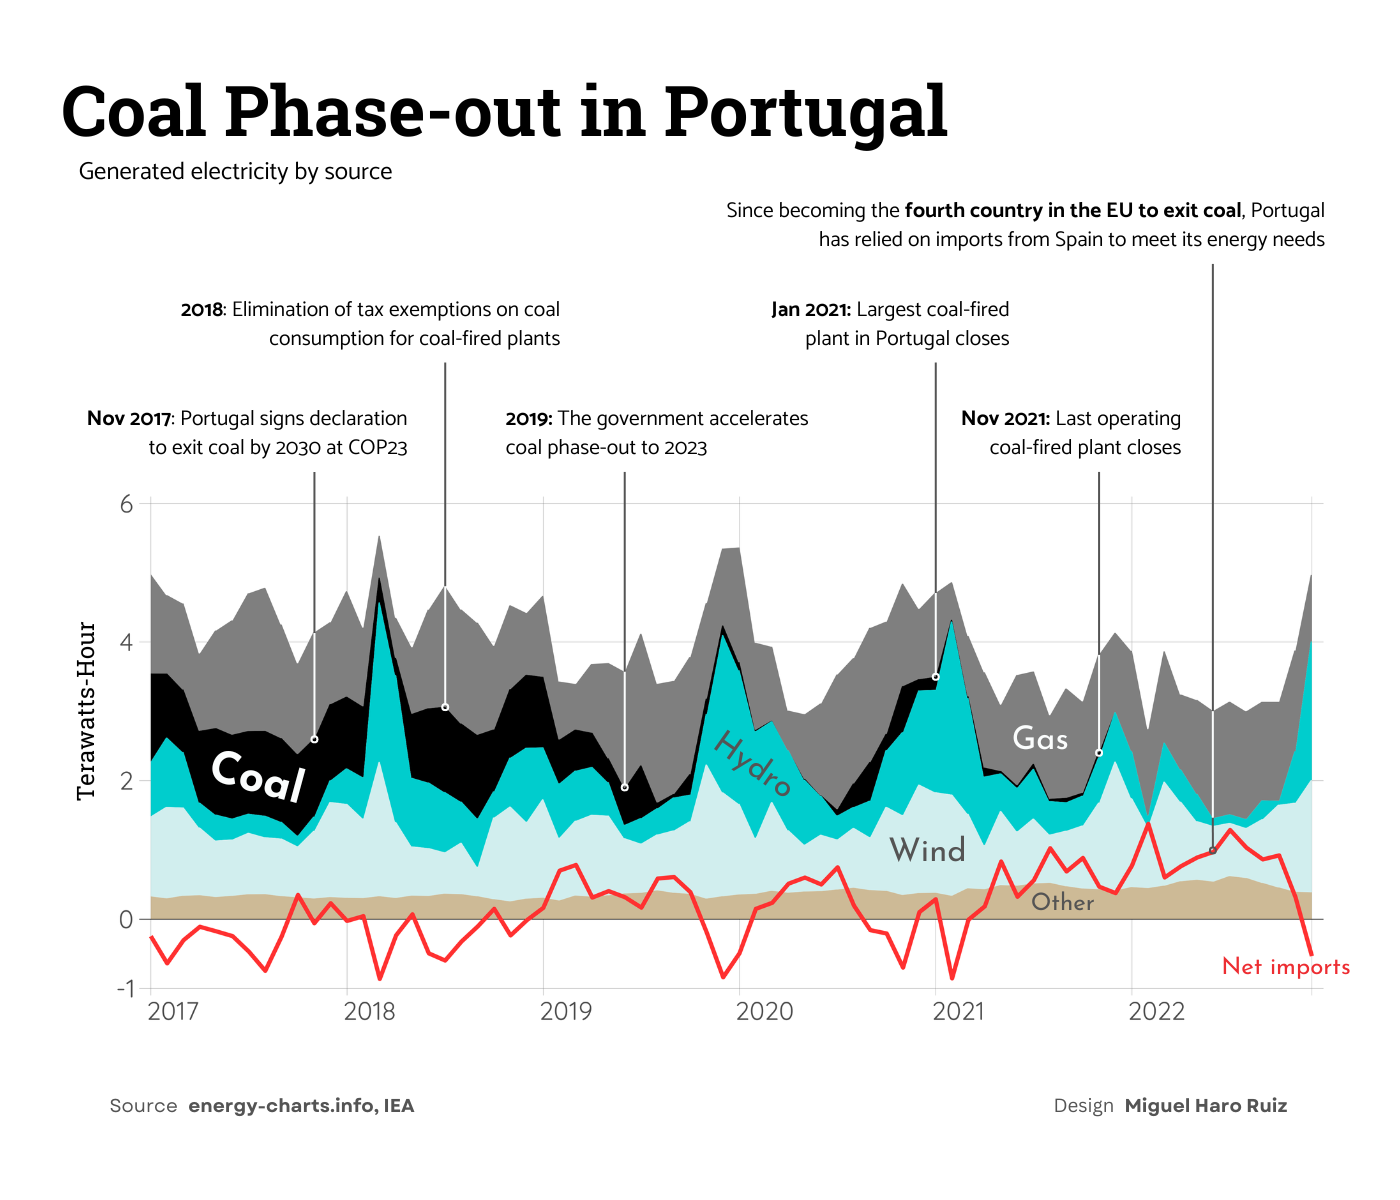 An area chart showing the electricity generated in Portugal between 2017 and 2022 to highlight the coal pahse-out in this country.